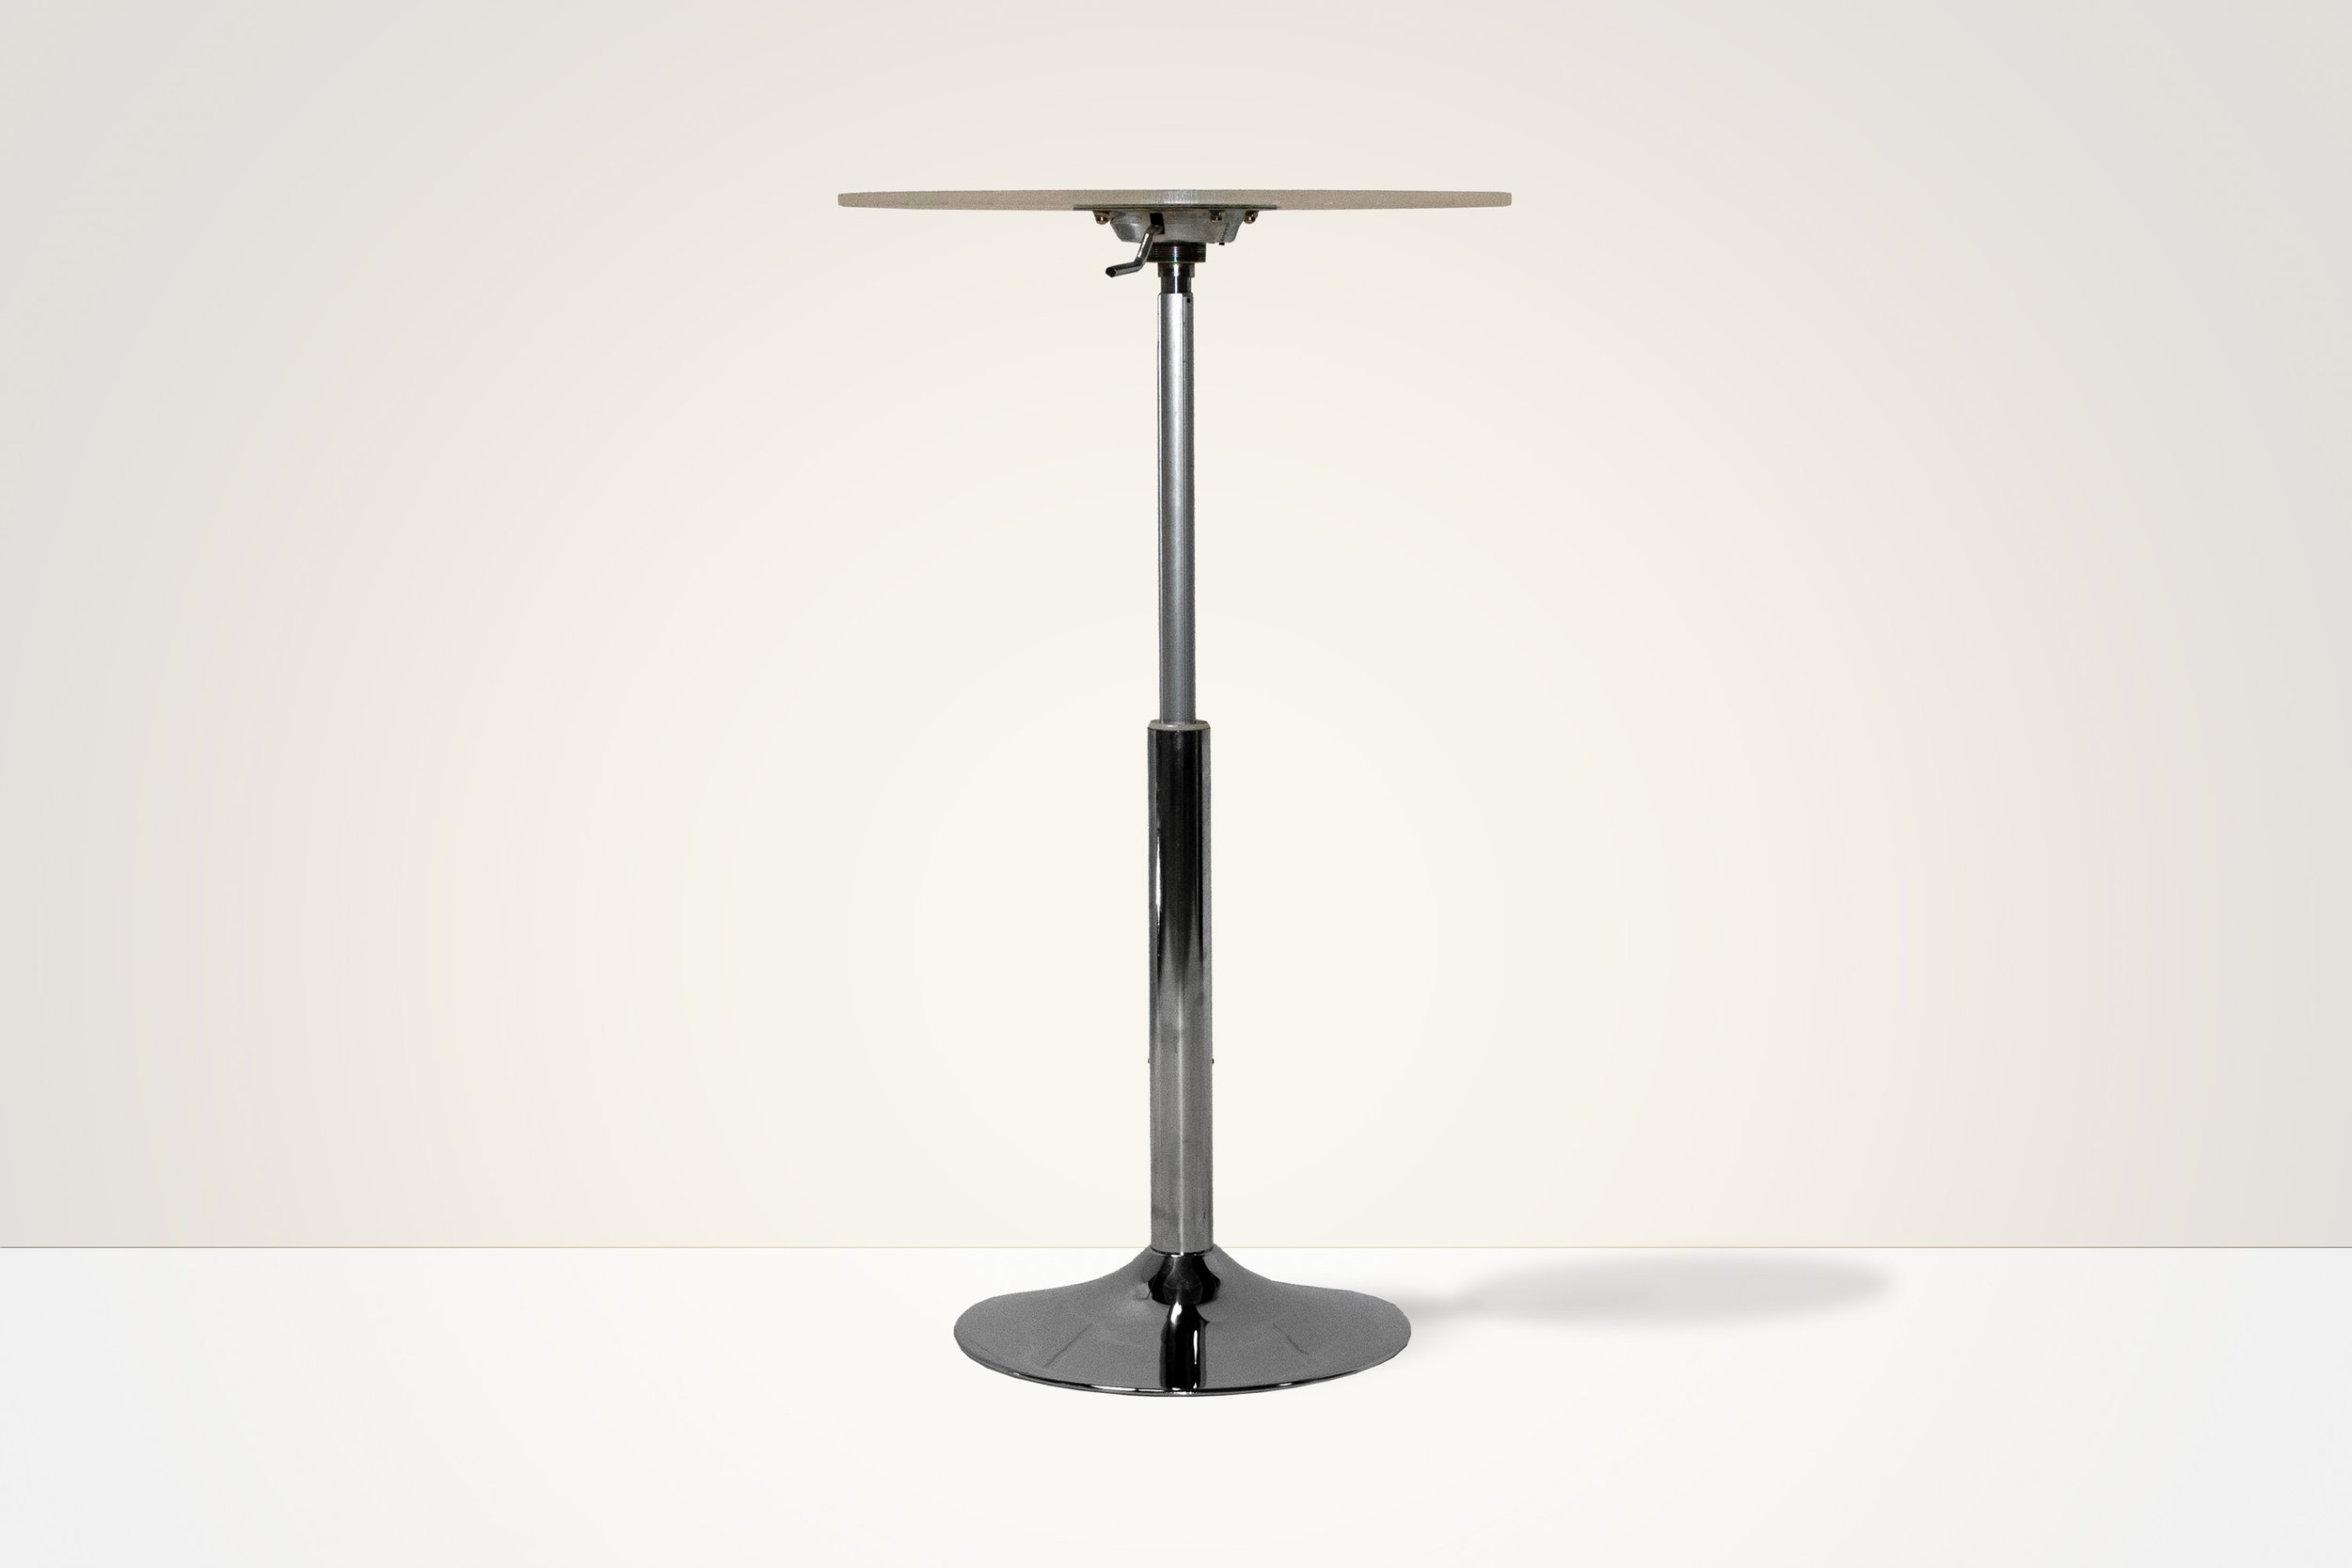 The LED Cocktail table